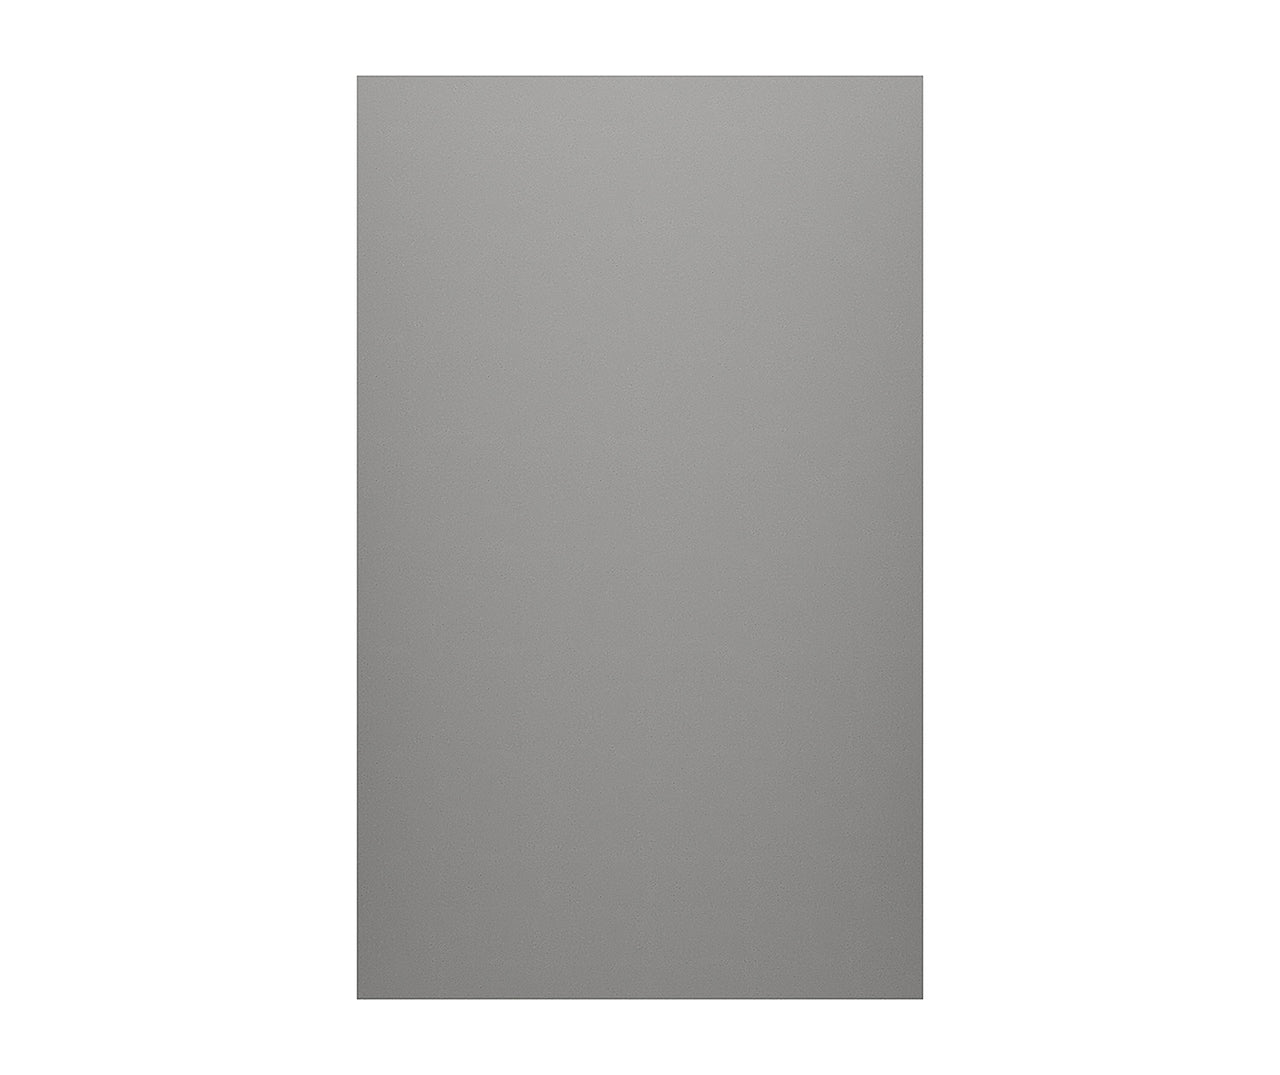 SS-3672-1 36 x 72 Swanstone Smooth Glue up Bathtub and Shower Single Wall Panel in Ash Gray